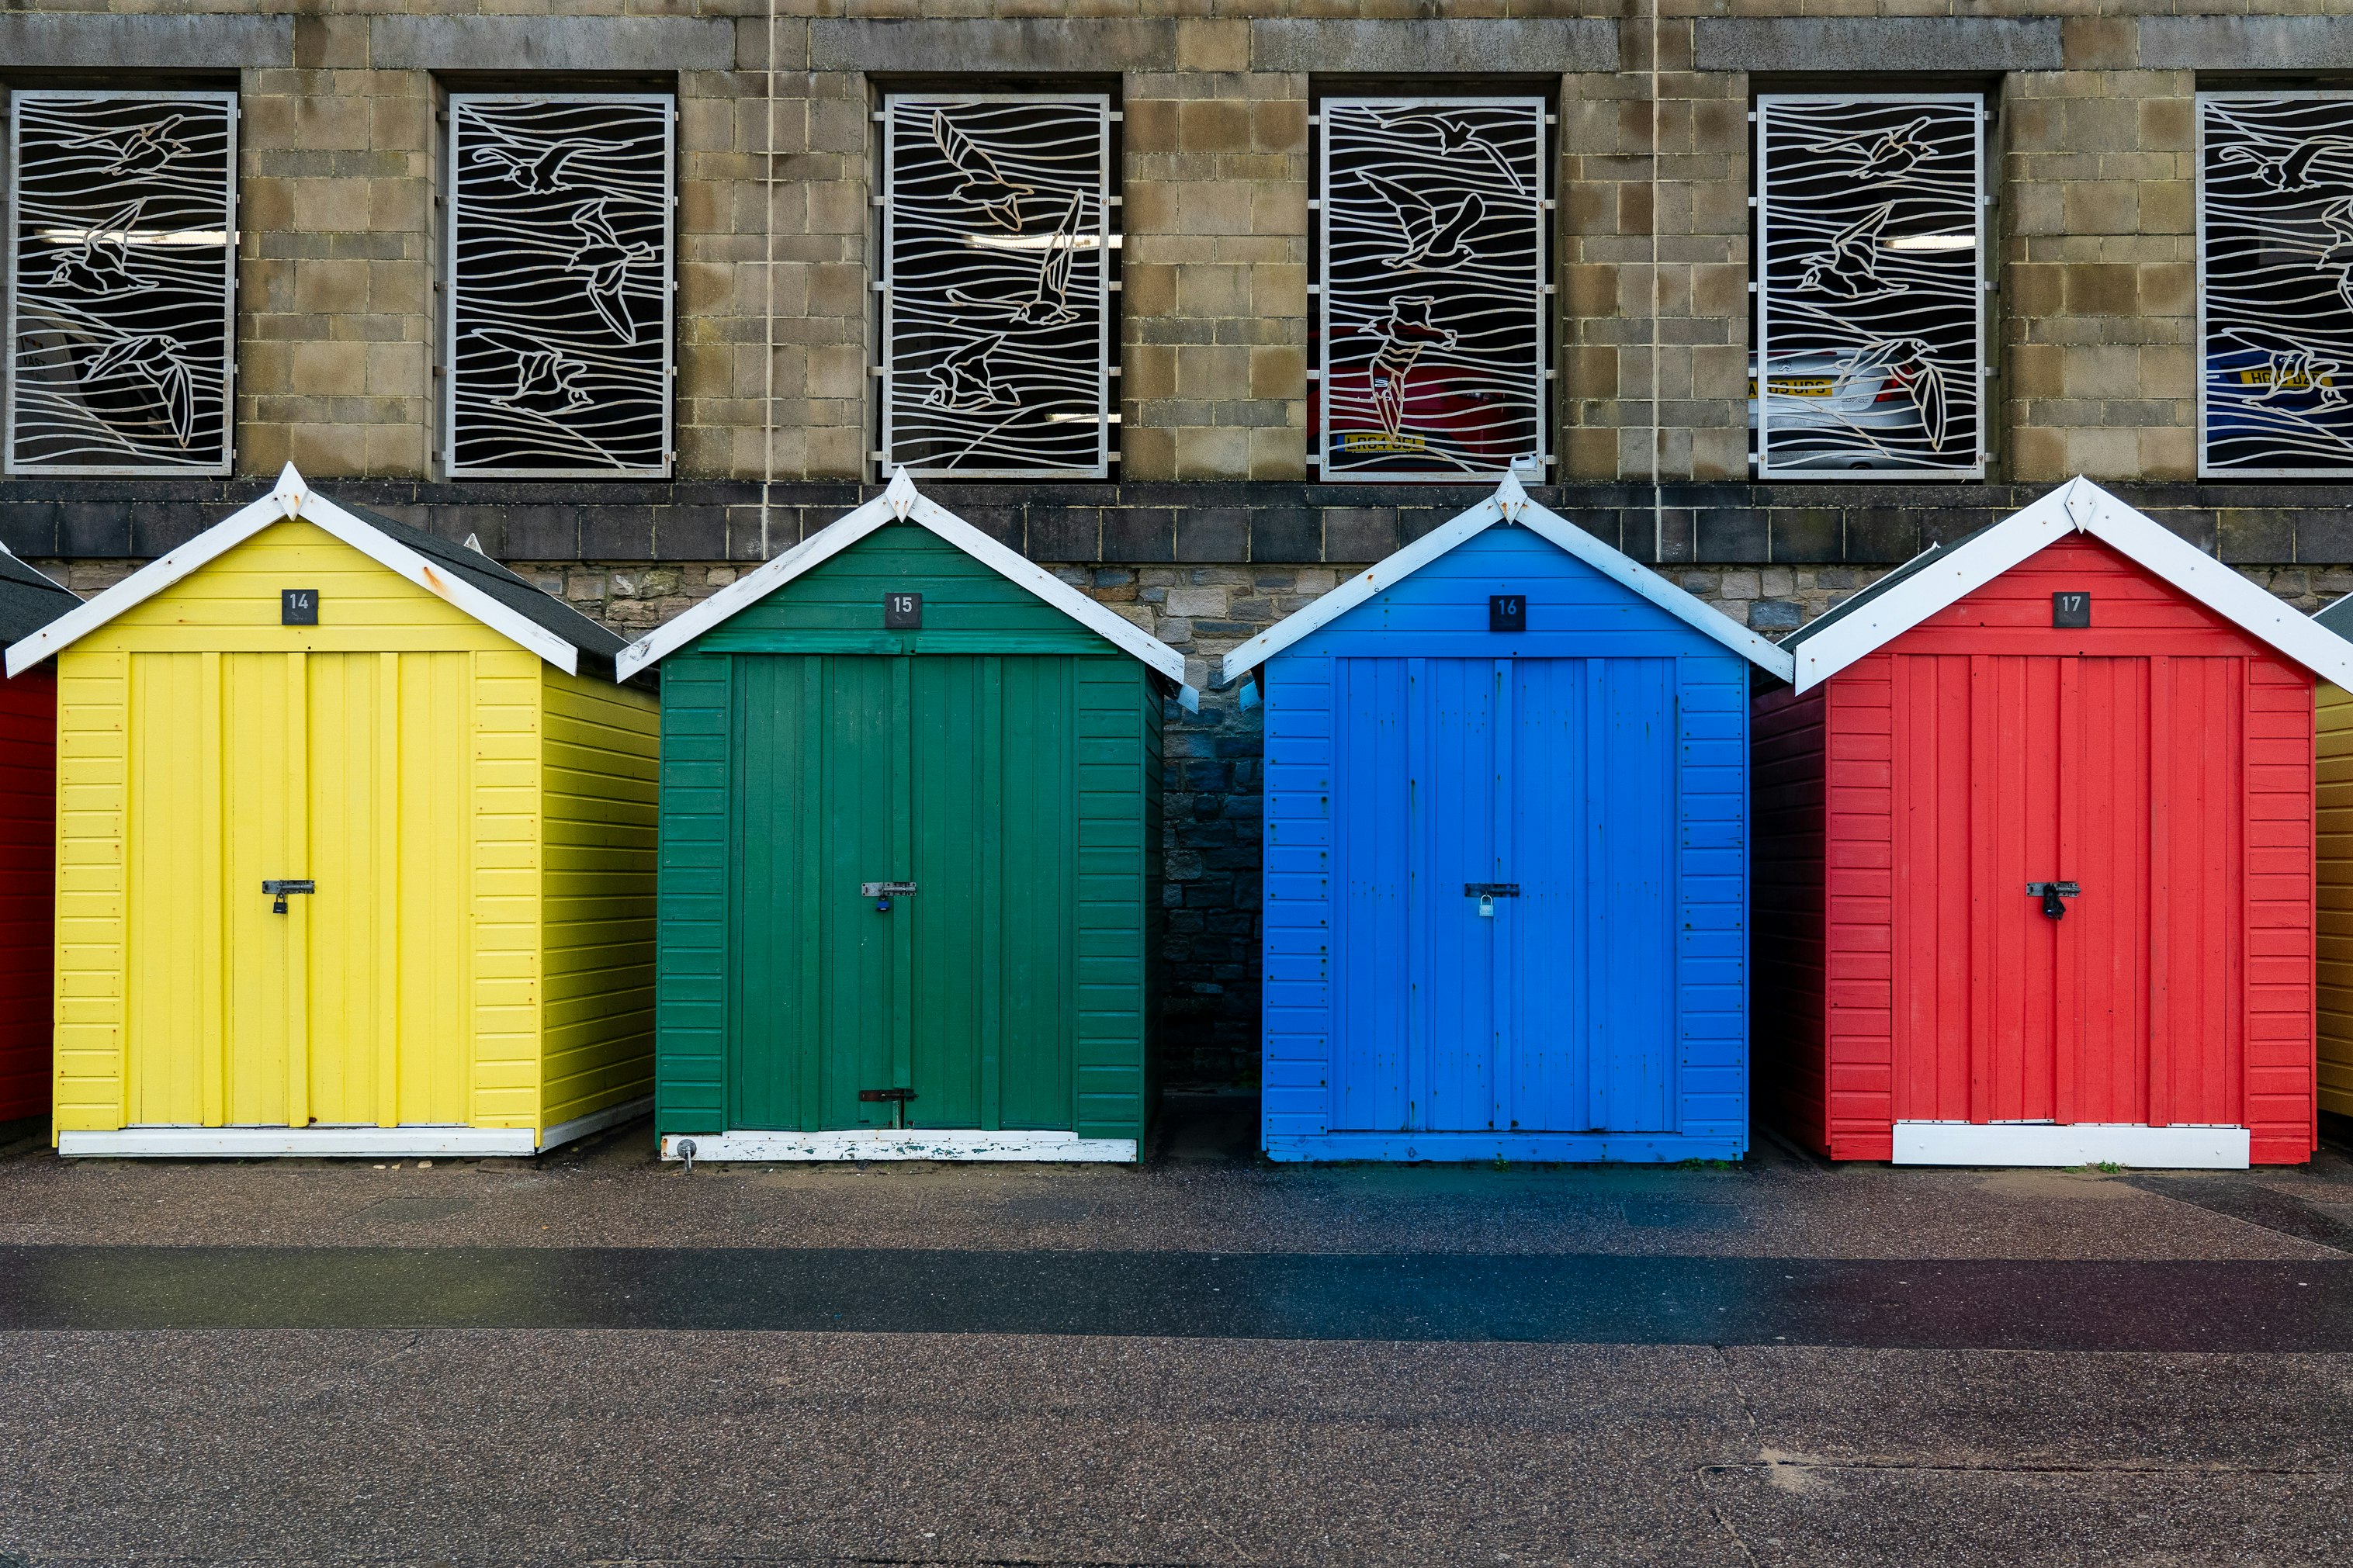 Four beach huts, each painted in the four primary colours, of yellow, green, blue and red.